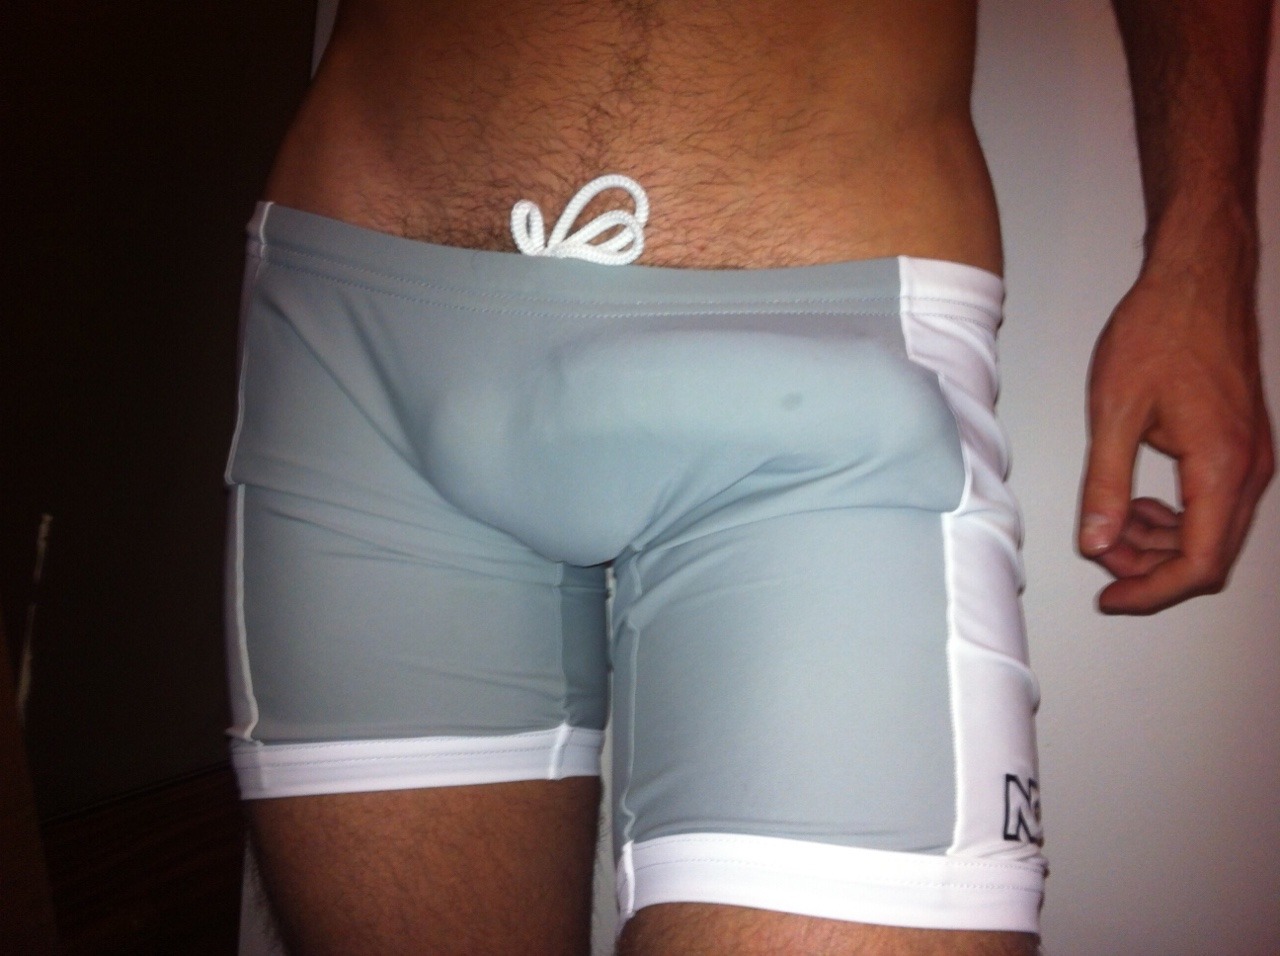 brenton johnston recommends how to get a bigger bulge in your pants pic